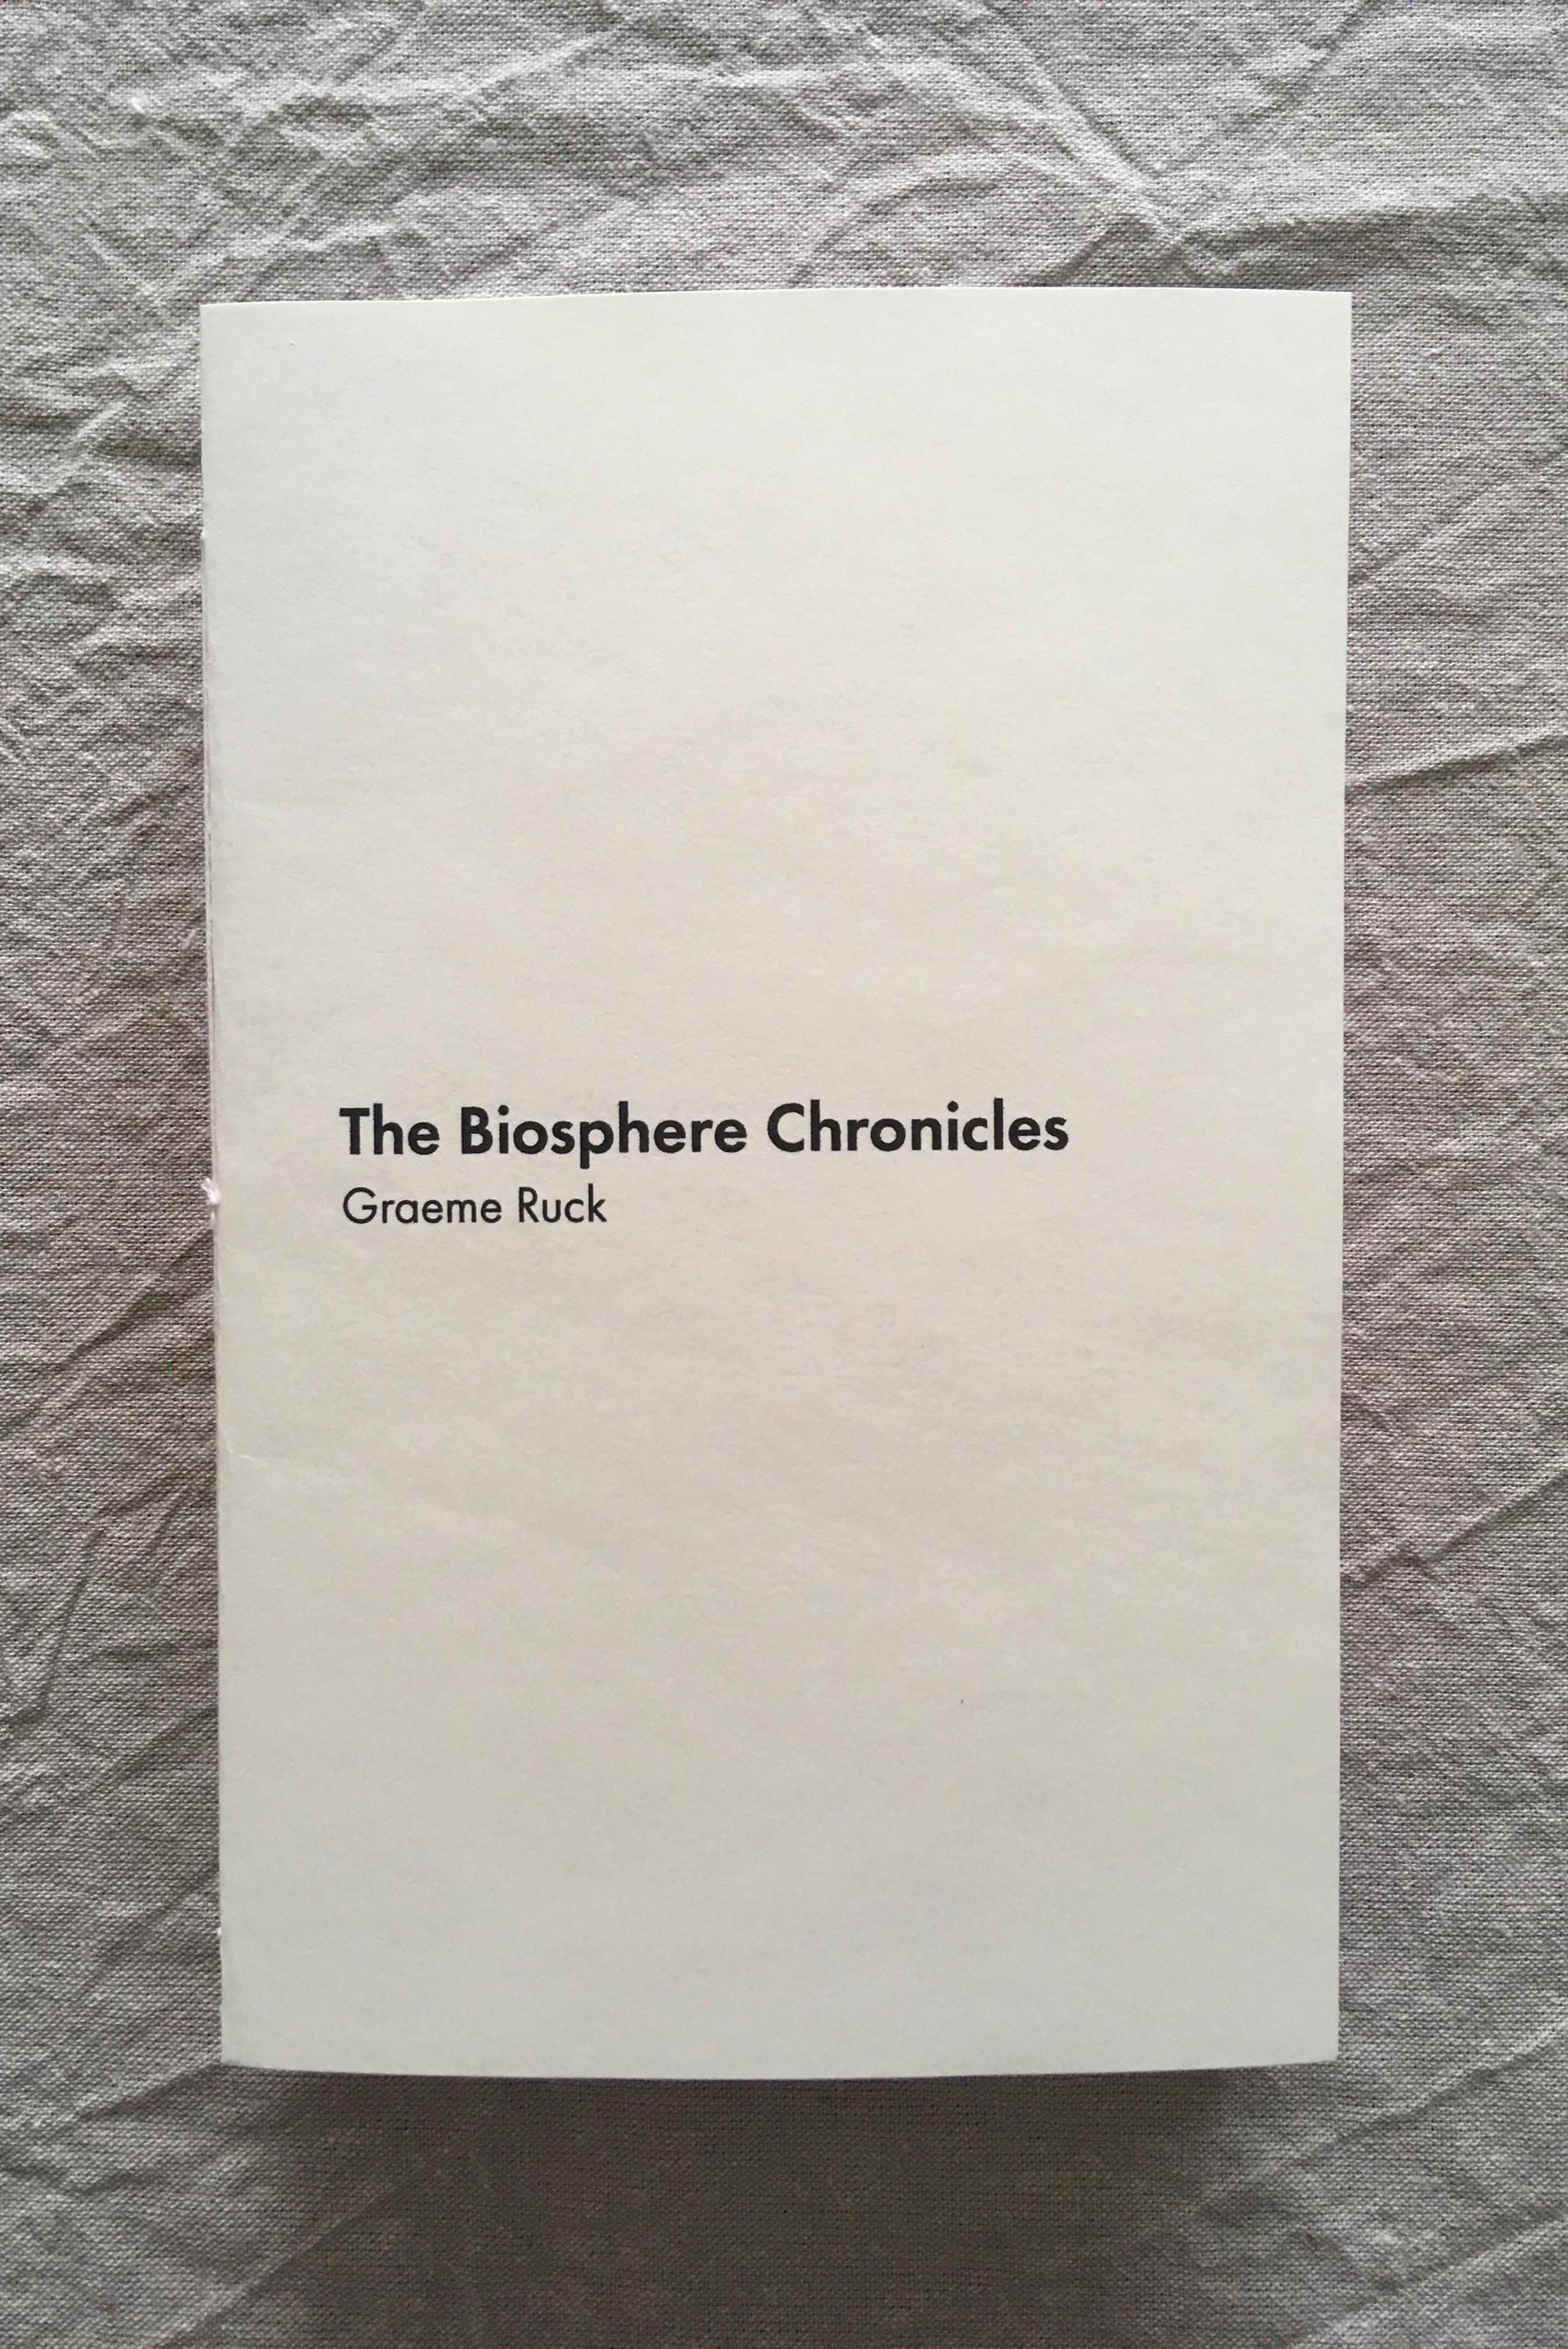 Book cover of The Biosphere Chronicles by Graeme Ruck